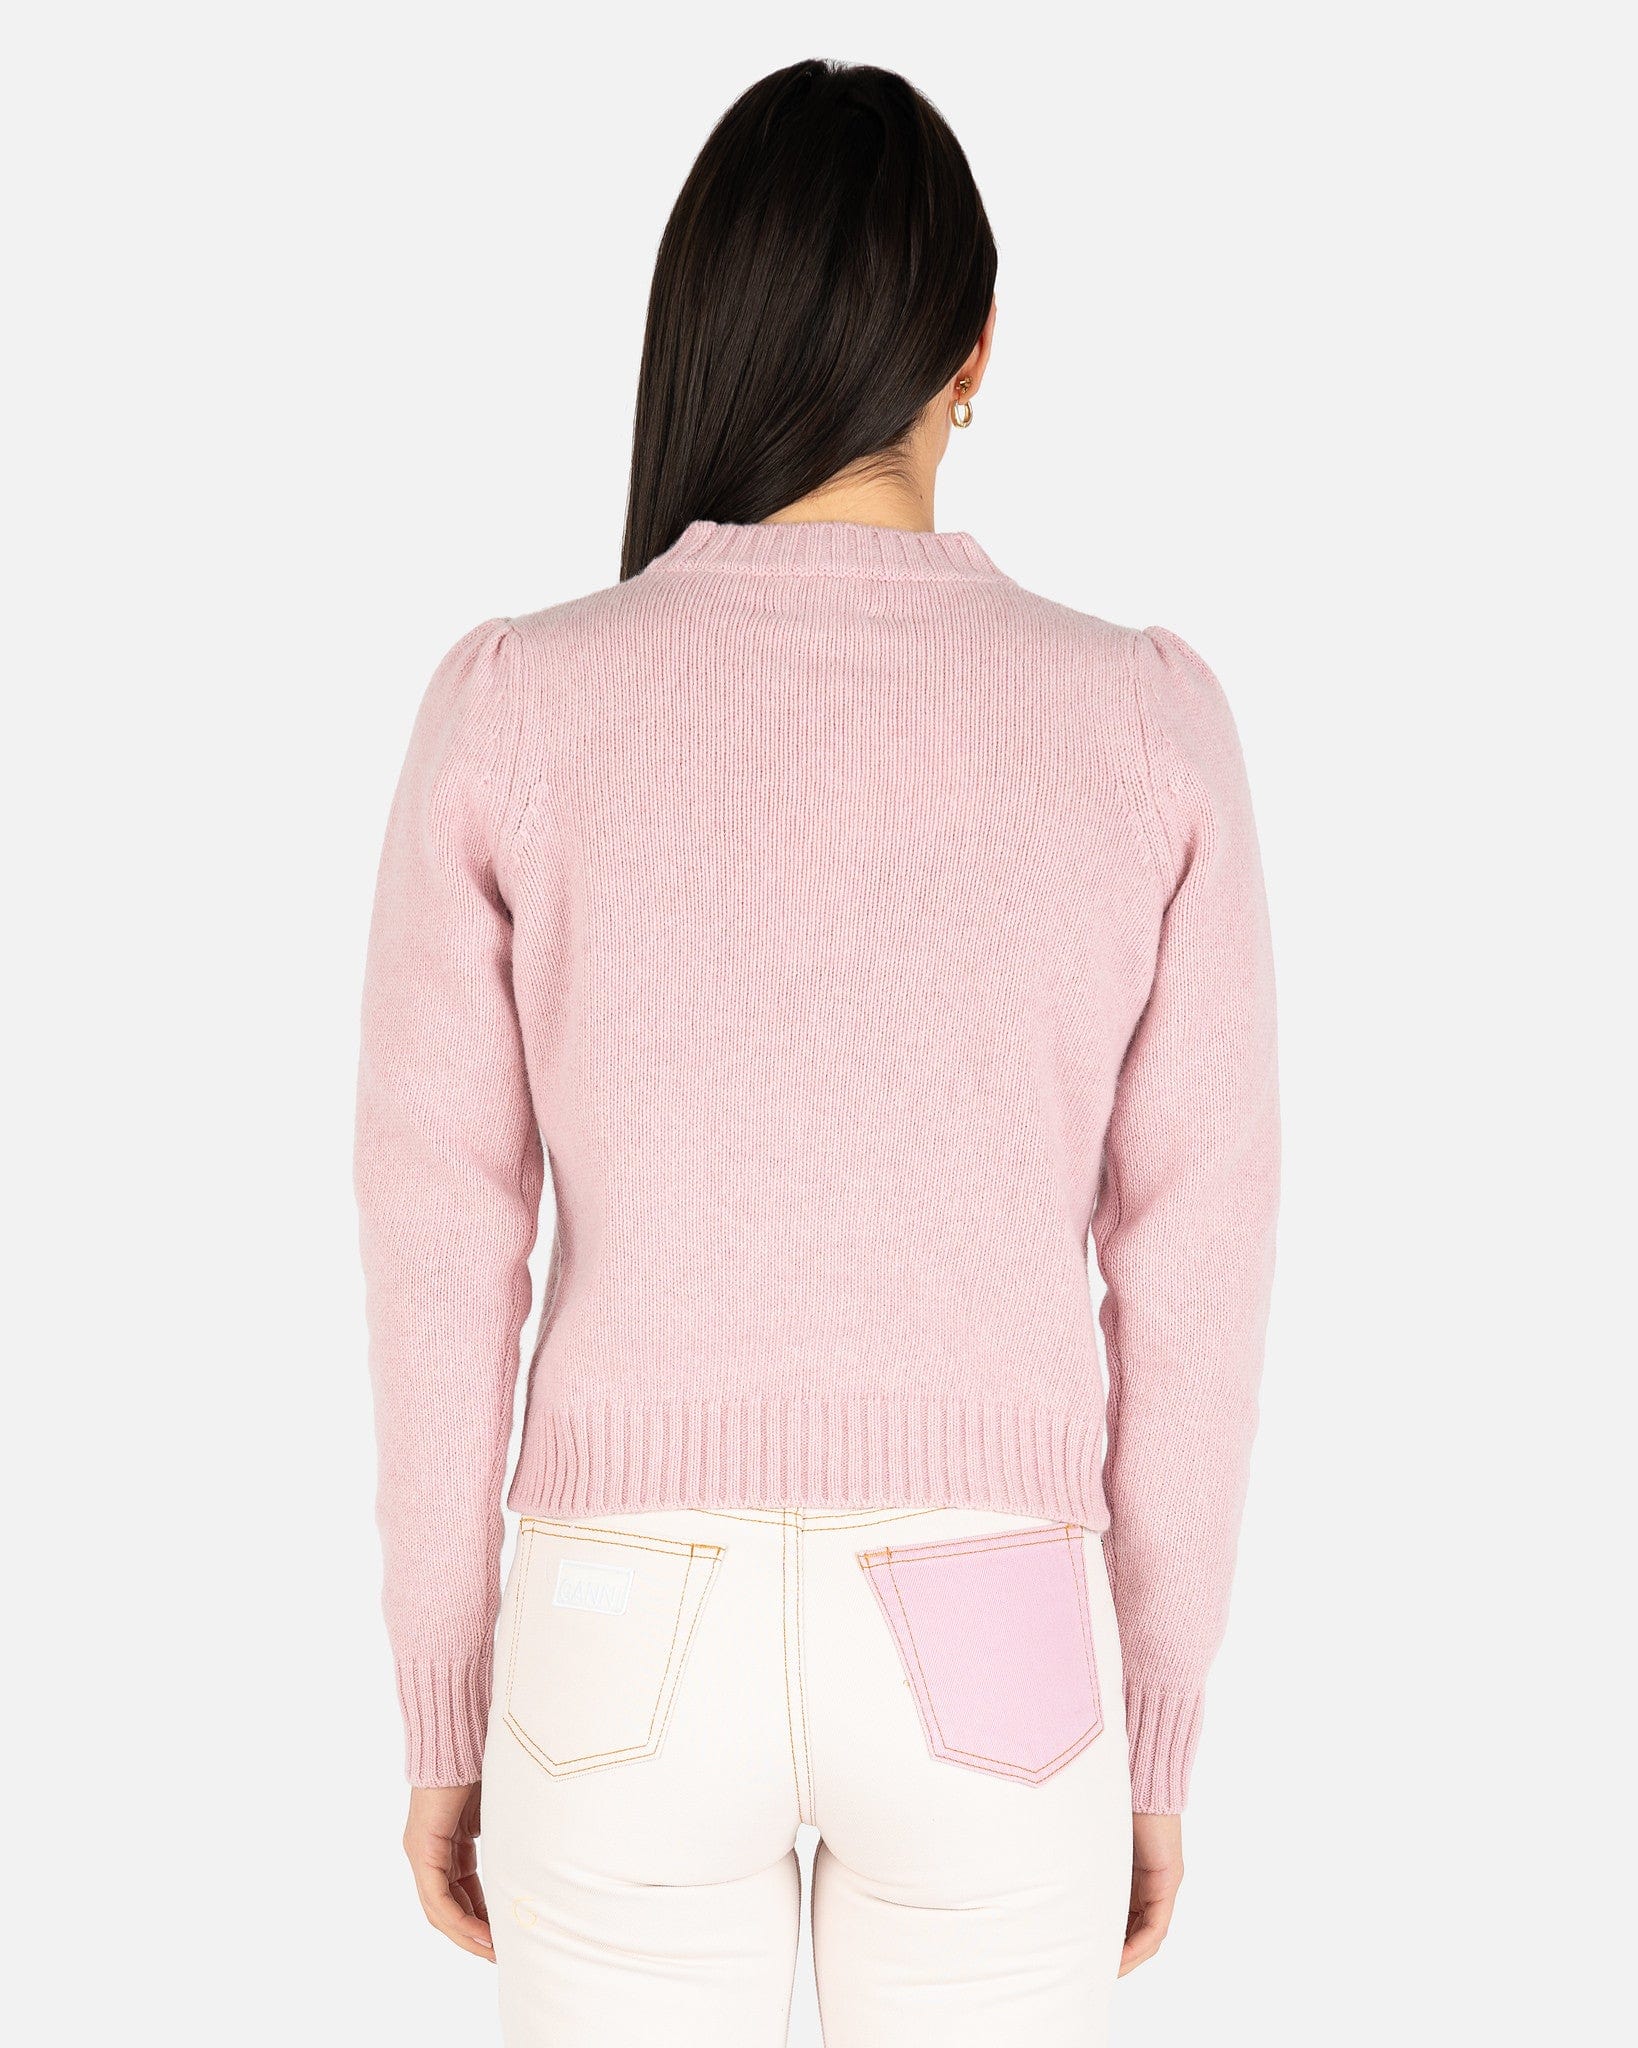 Ganni Women Sweaters Graphic Lambswool Sweater in Pink Lavender